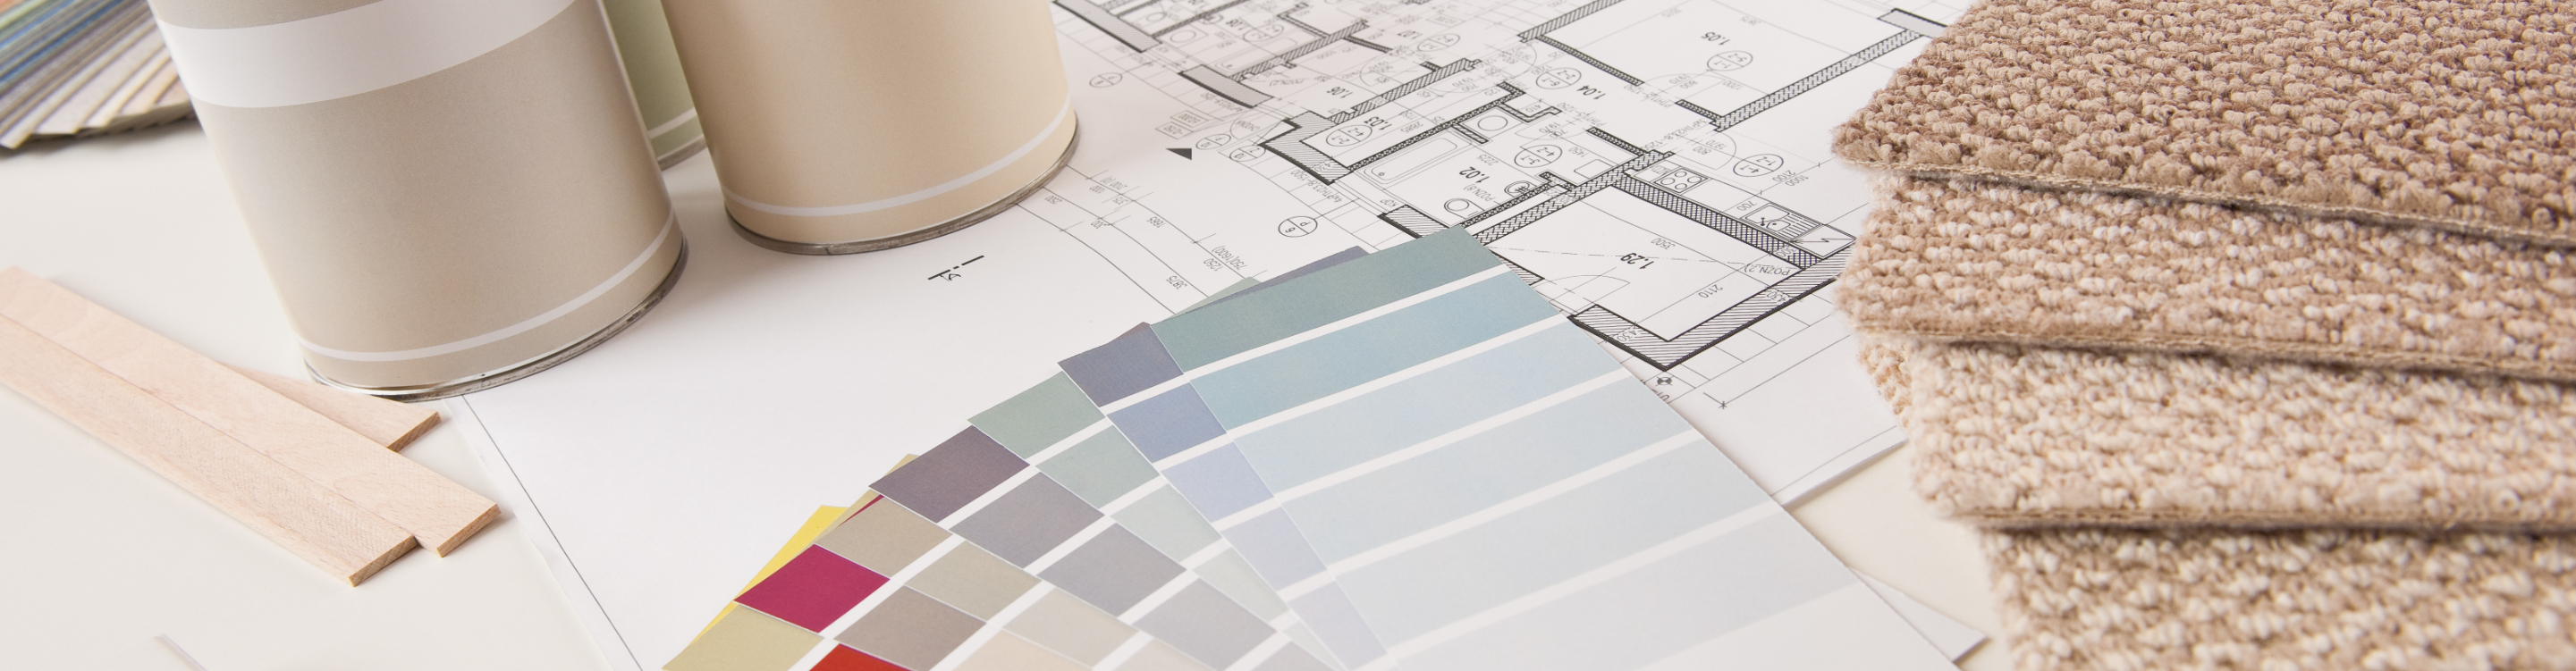 design services with paint swatches and room measurements